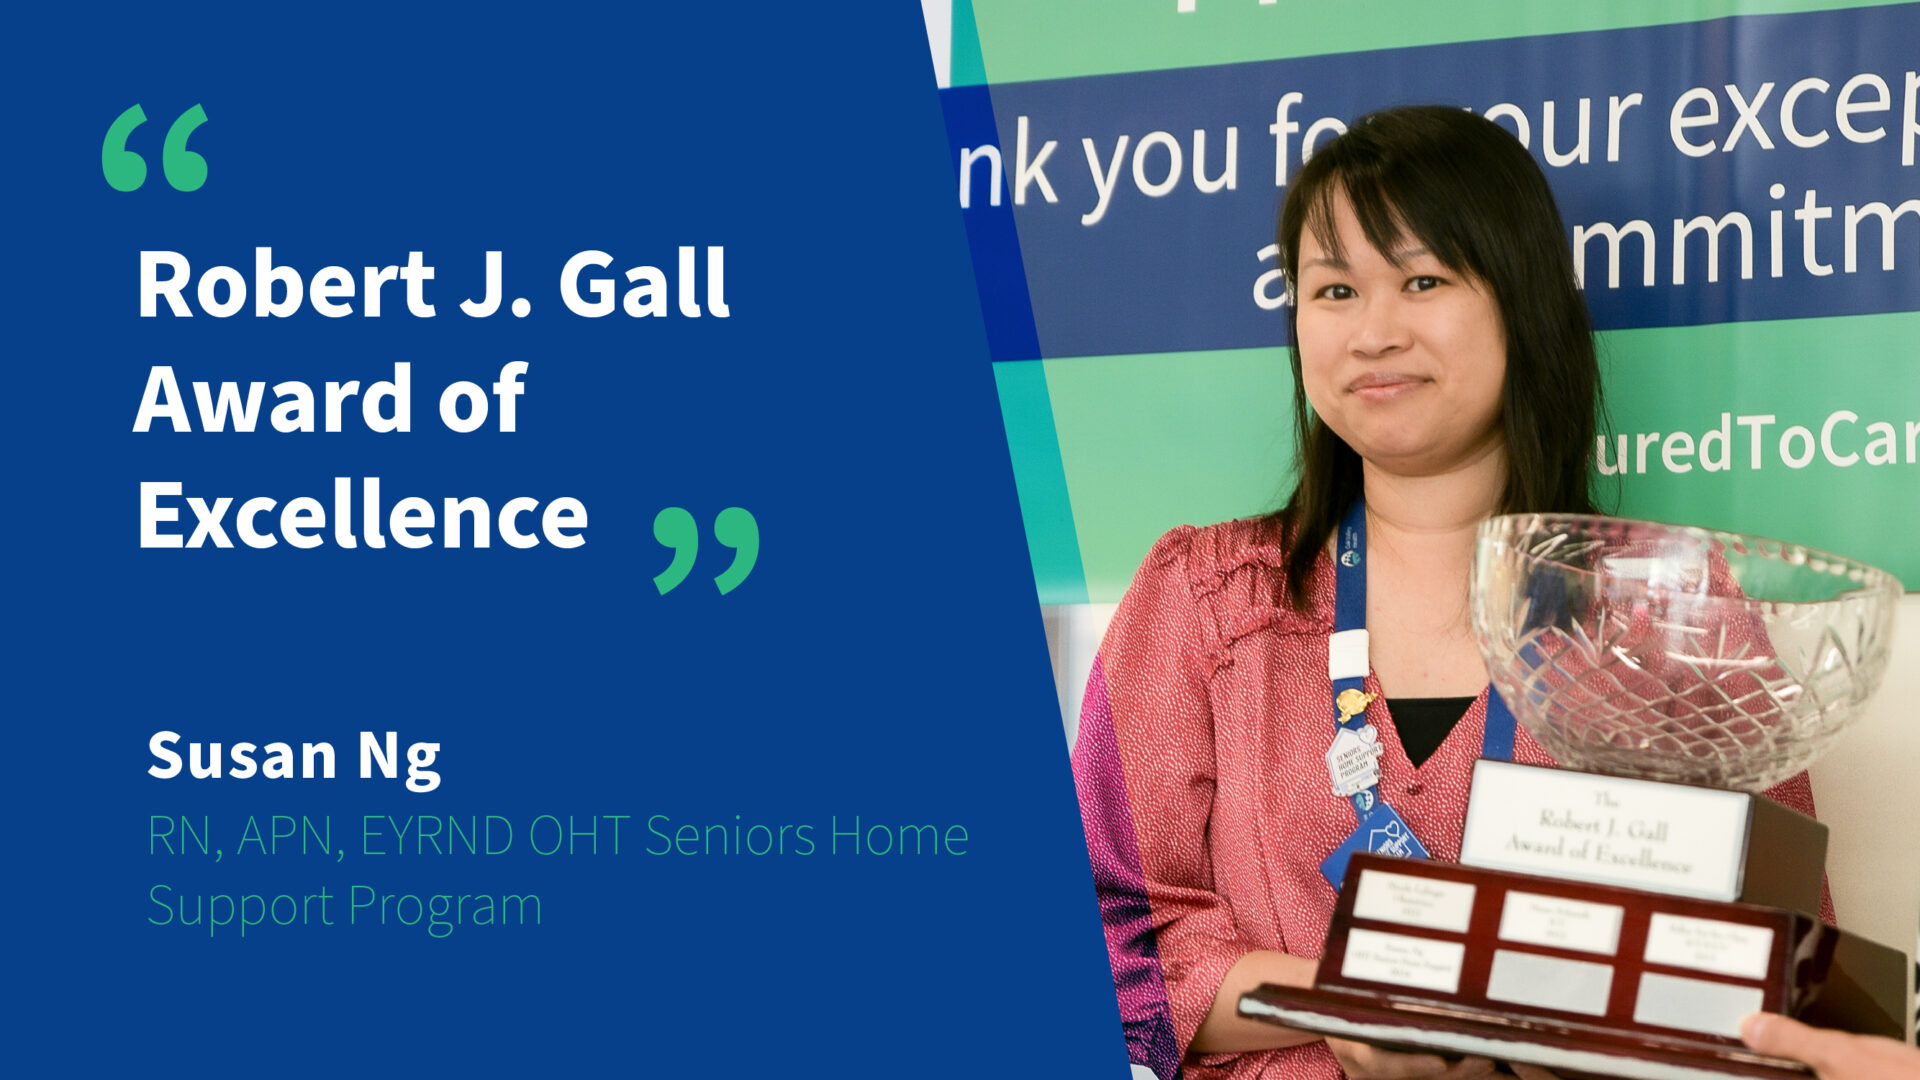 An insert image of Oak Valley Health's nursing week awards winner - Susan Ng who is a RN and APN for the EYRND OHT Seniors Home Support Program